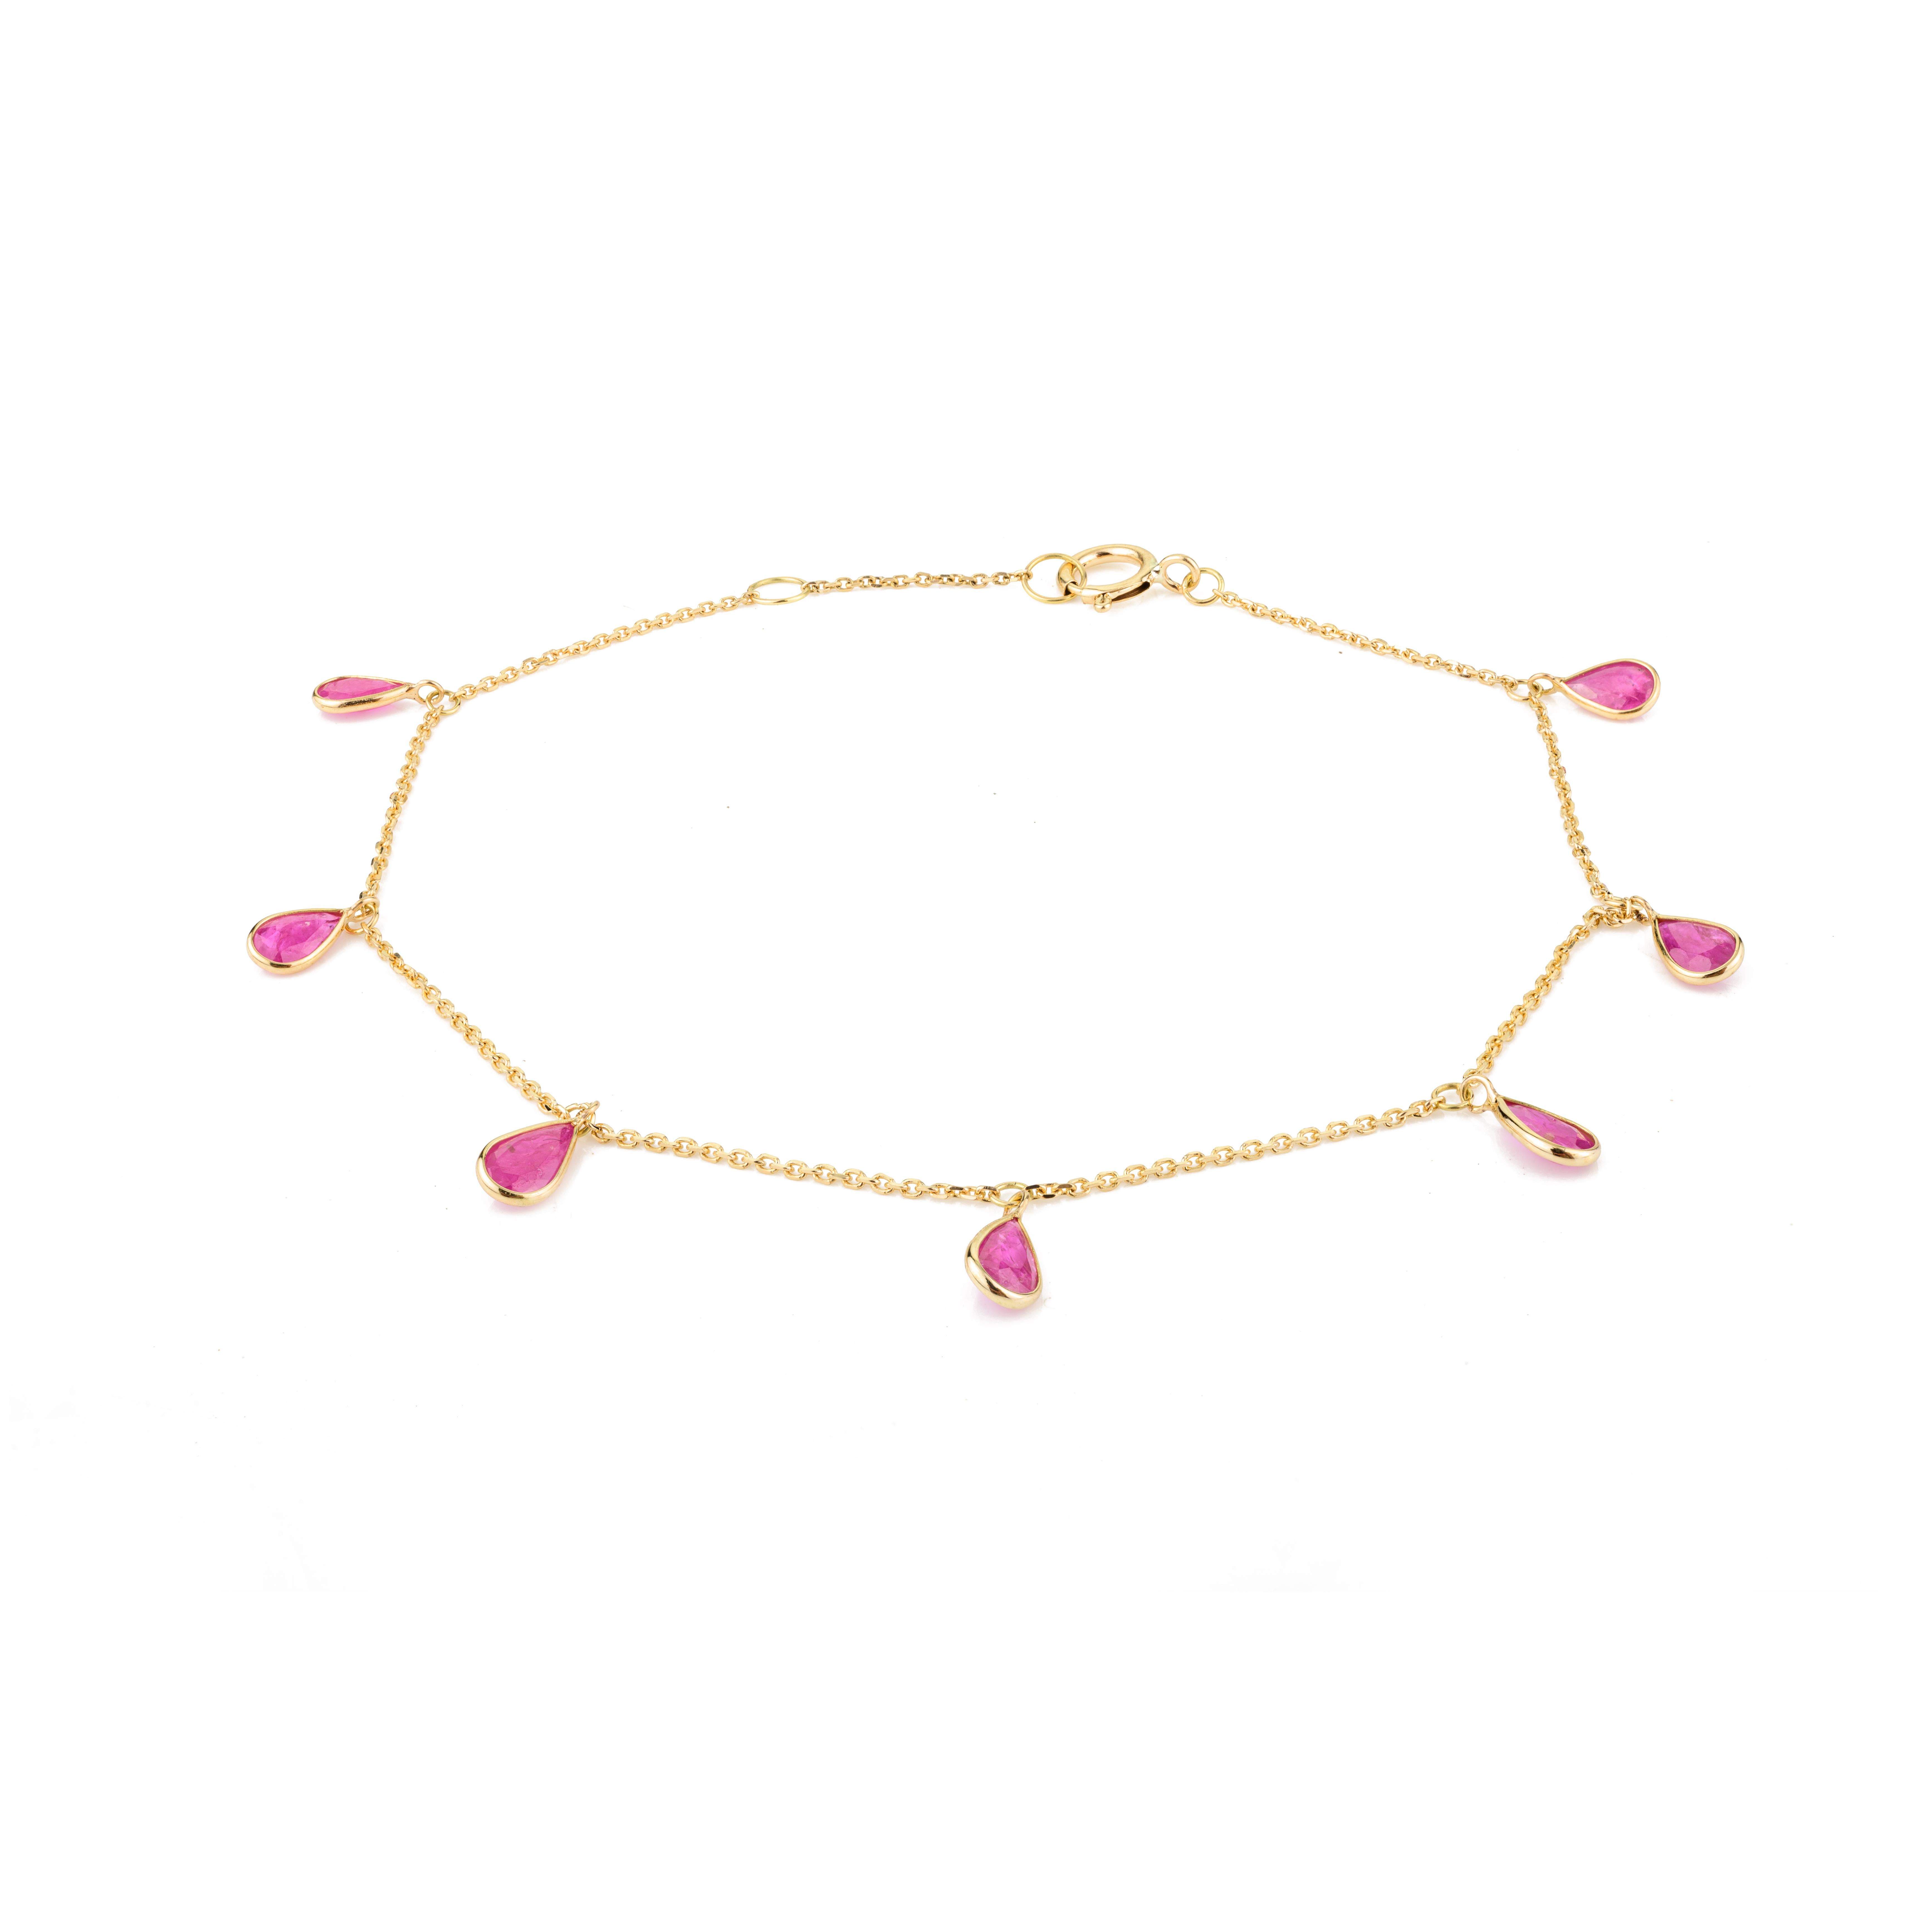 Ruby Everyday Chain Bracelet for Her Handcrafted in 18k Yellow Gold 1